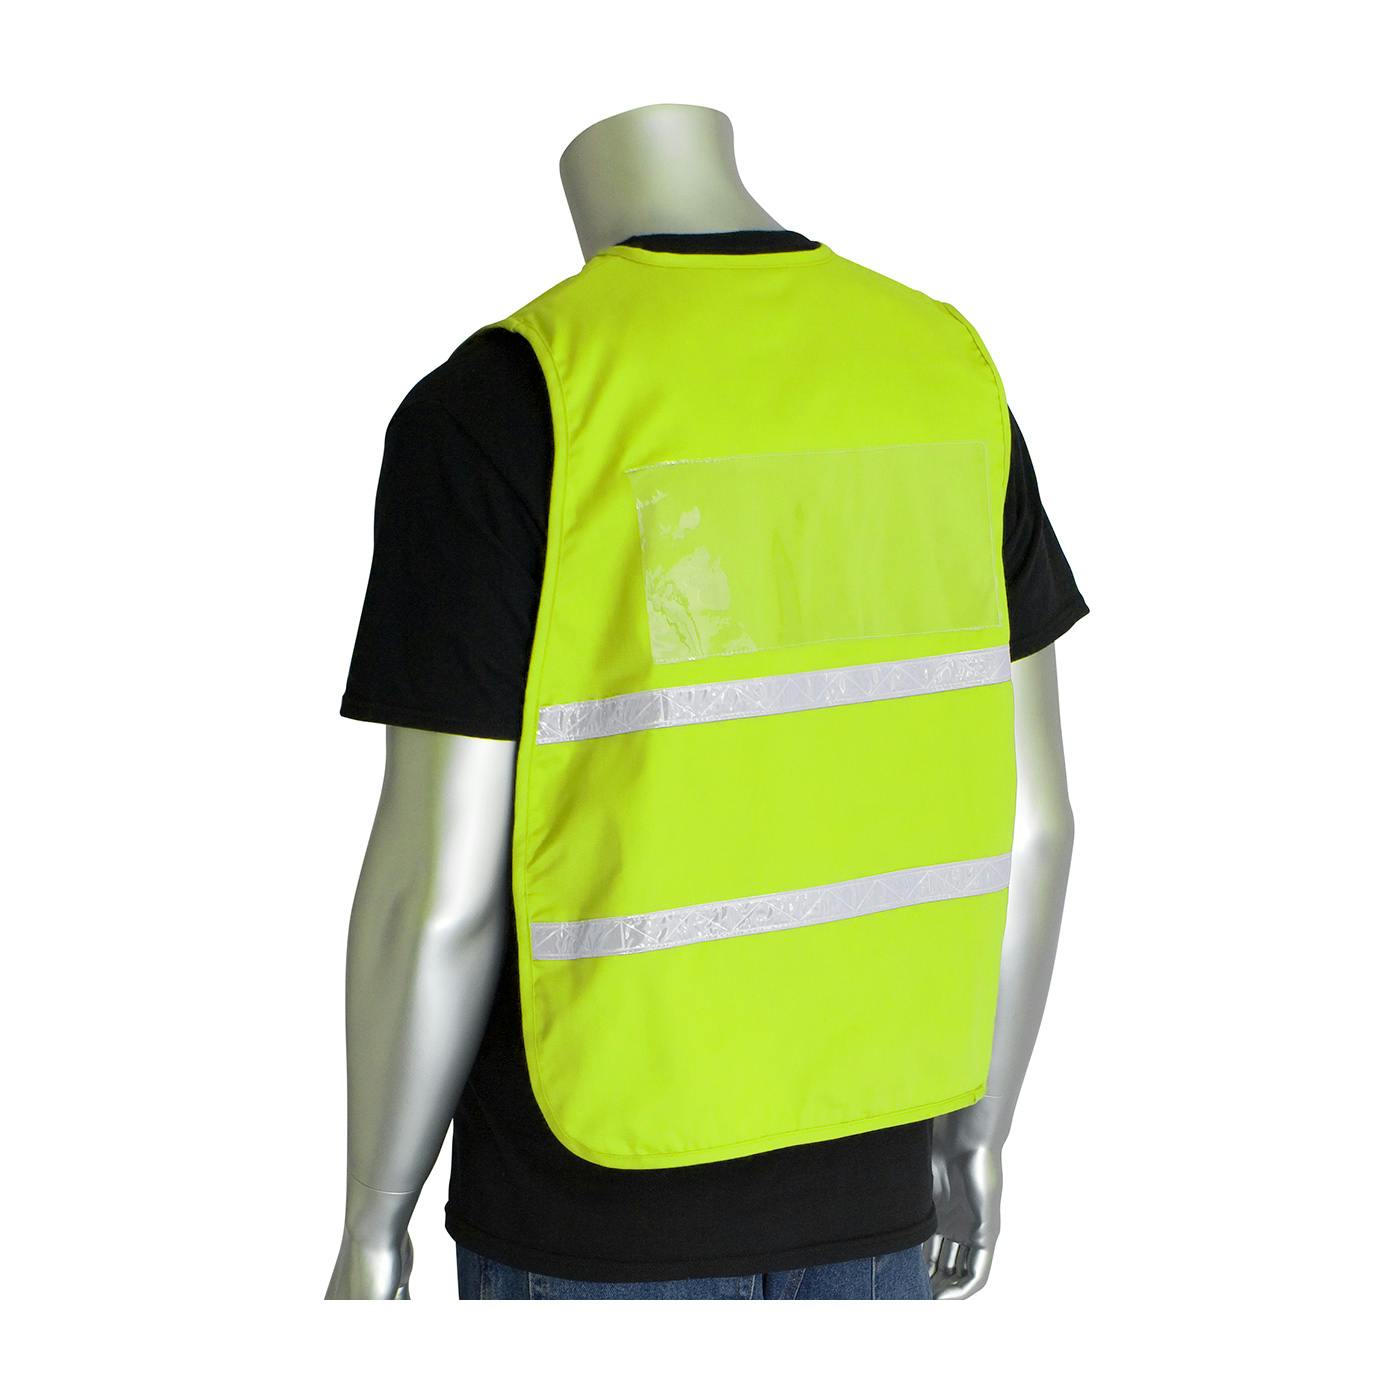 Non-ANSI Incident Command Vest - Solid Polyester, Hi-Vis Yellow (300-2513)